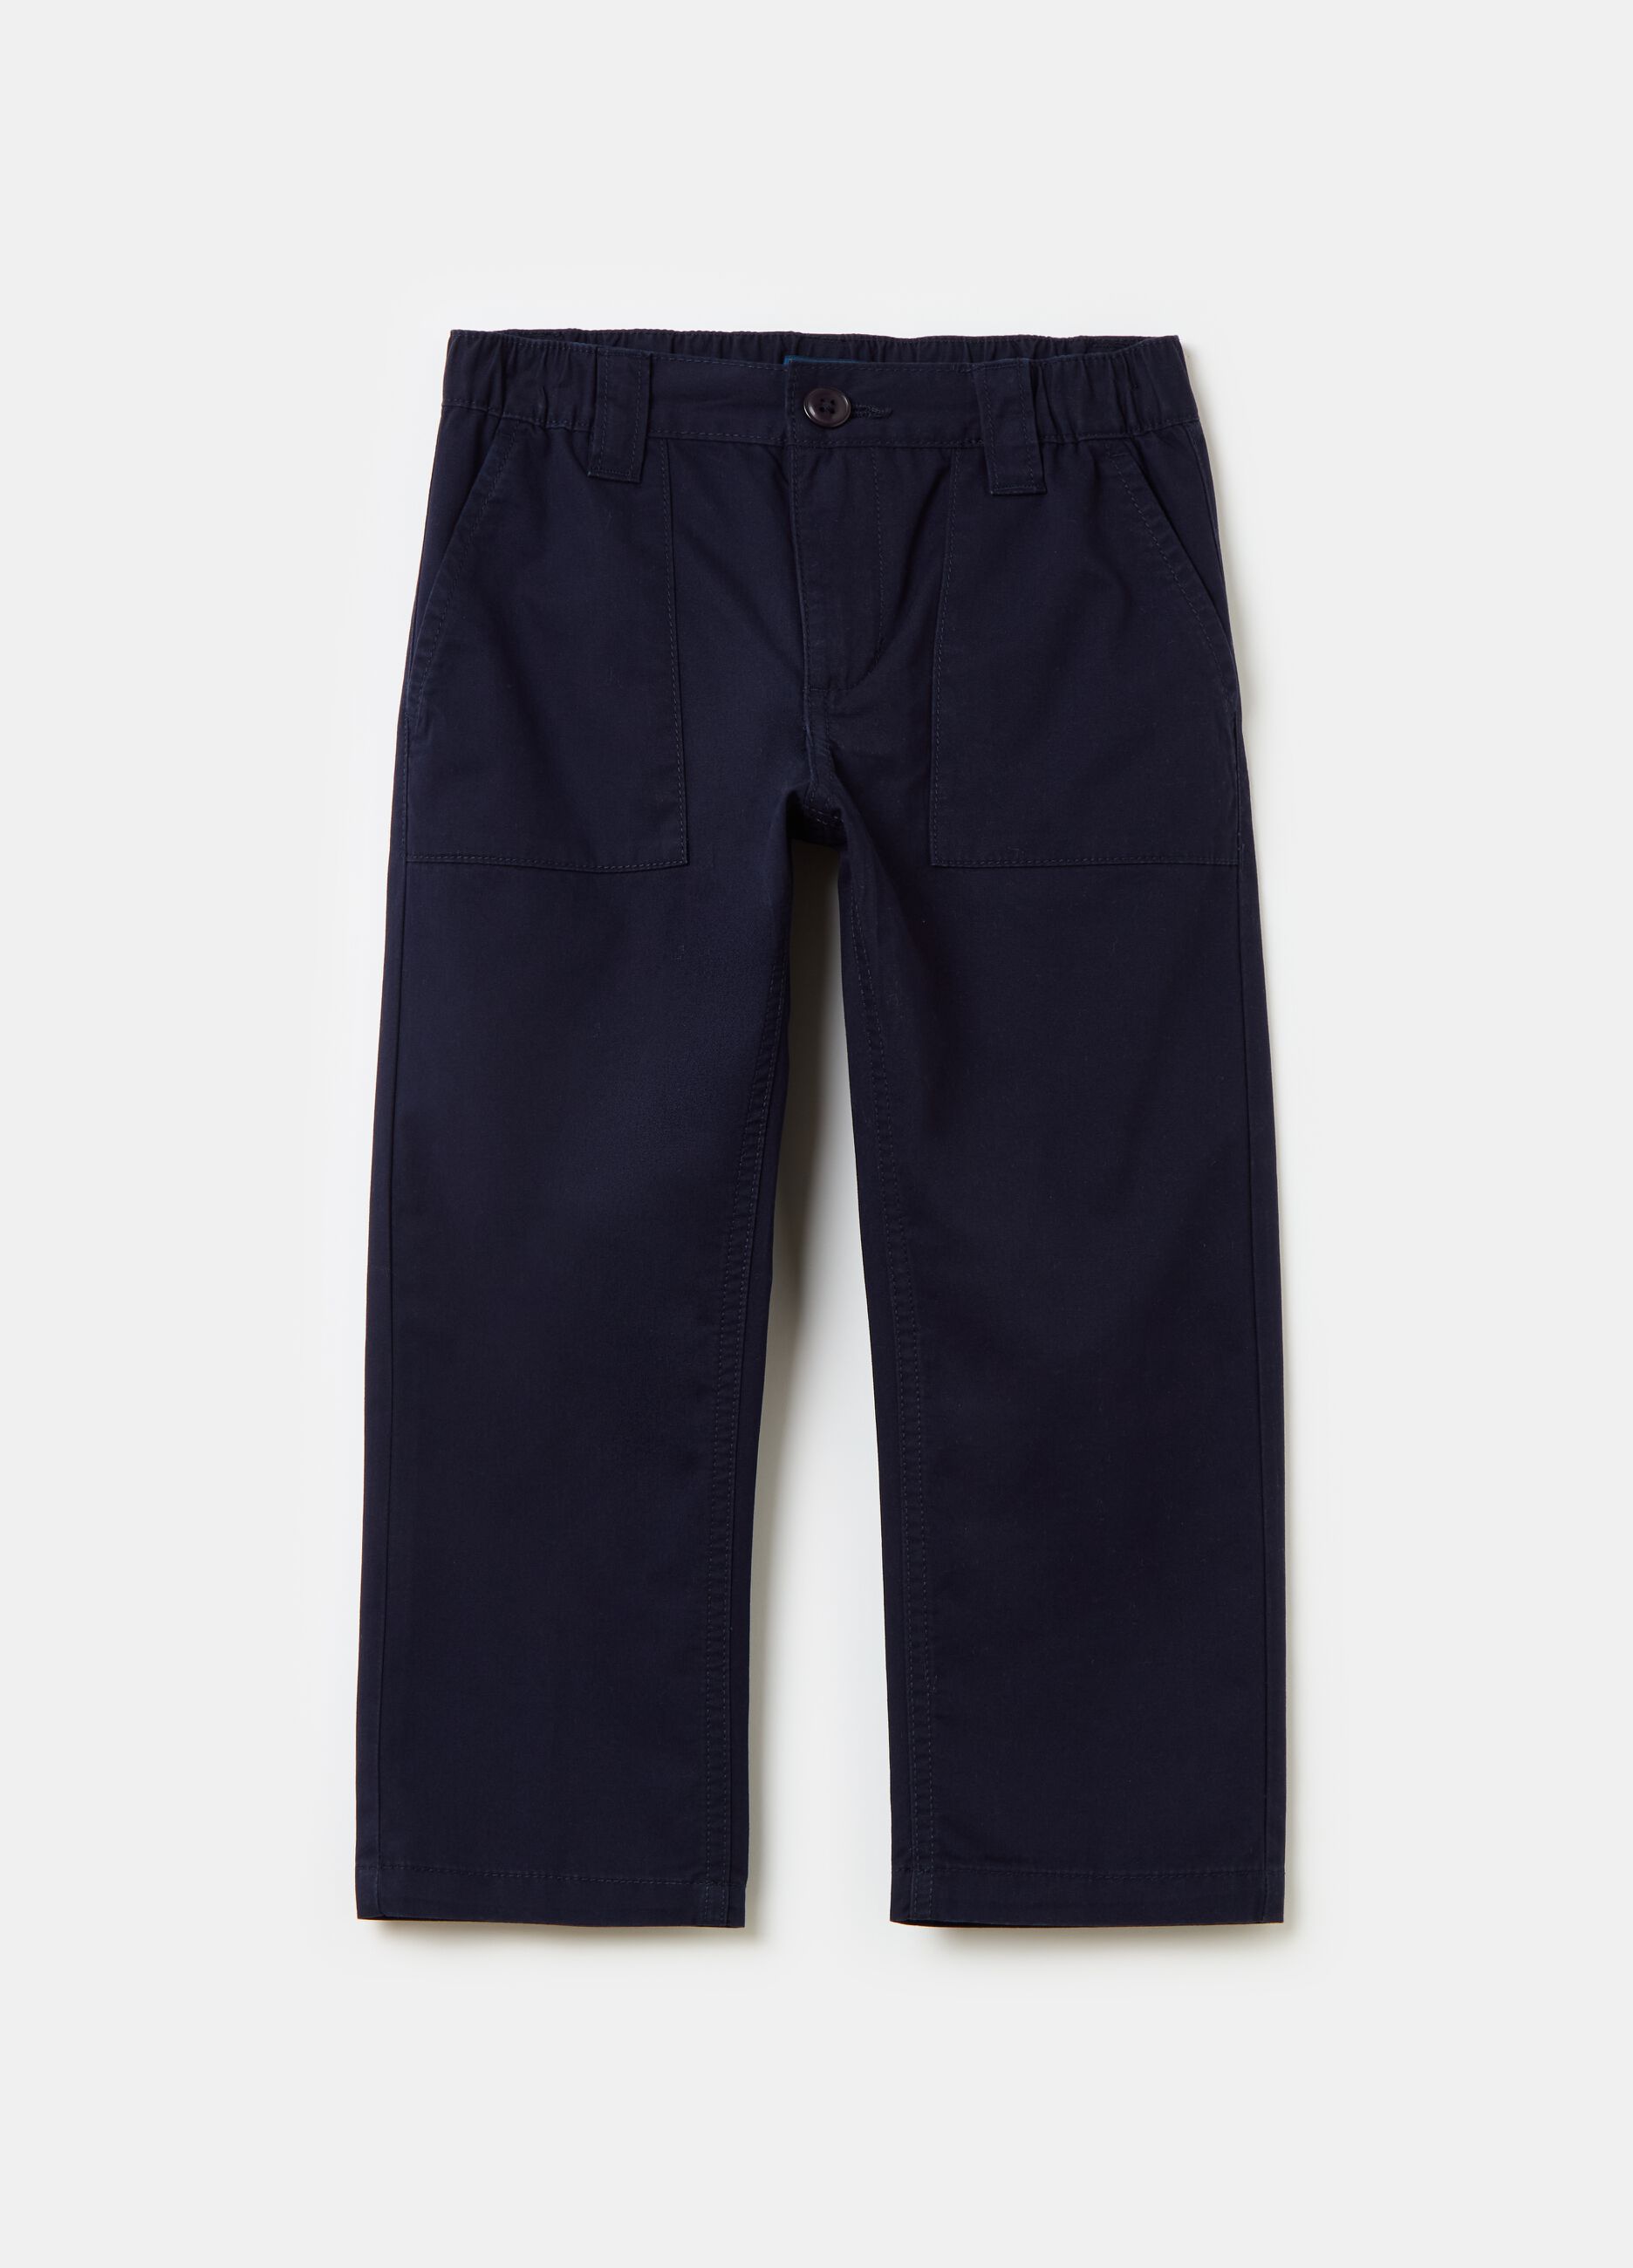 Cotton trousers with pockets